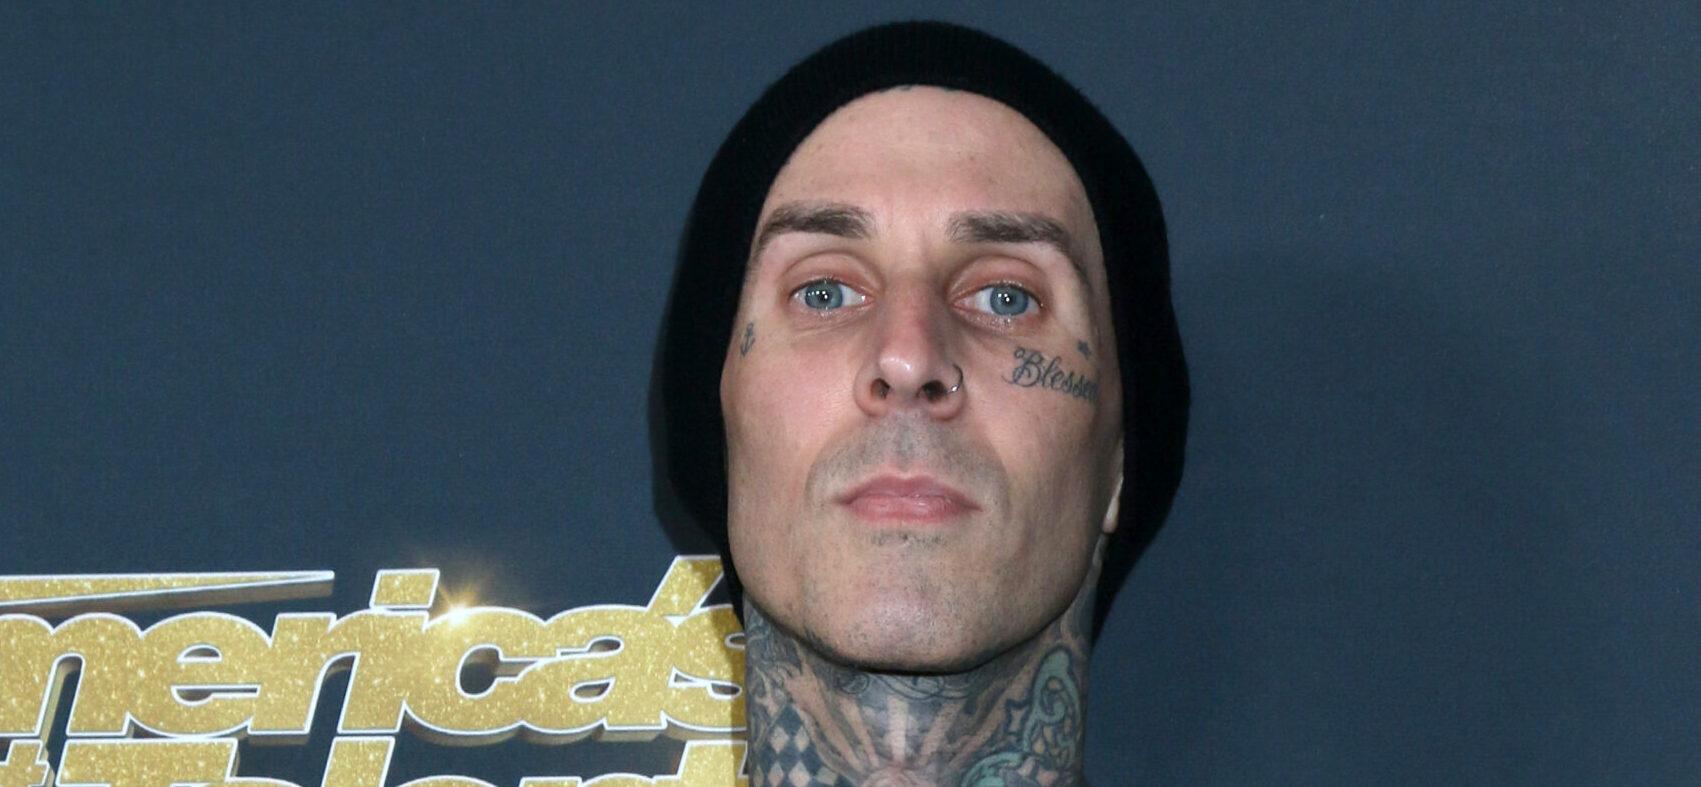 Travis Barker Bares It All In Hilarious Ad For Liquid Death’s ‘Enema’ Collectible Kit